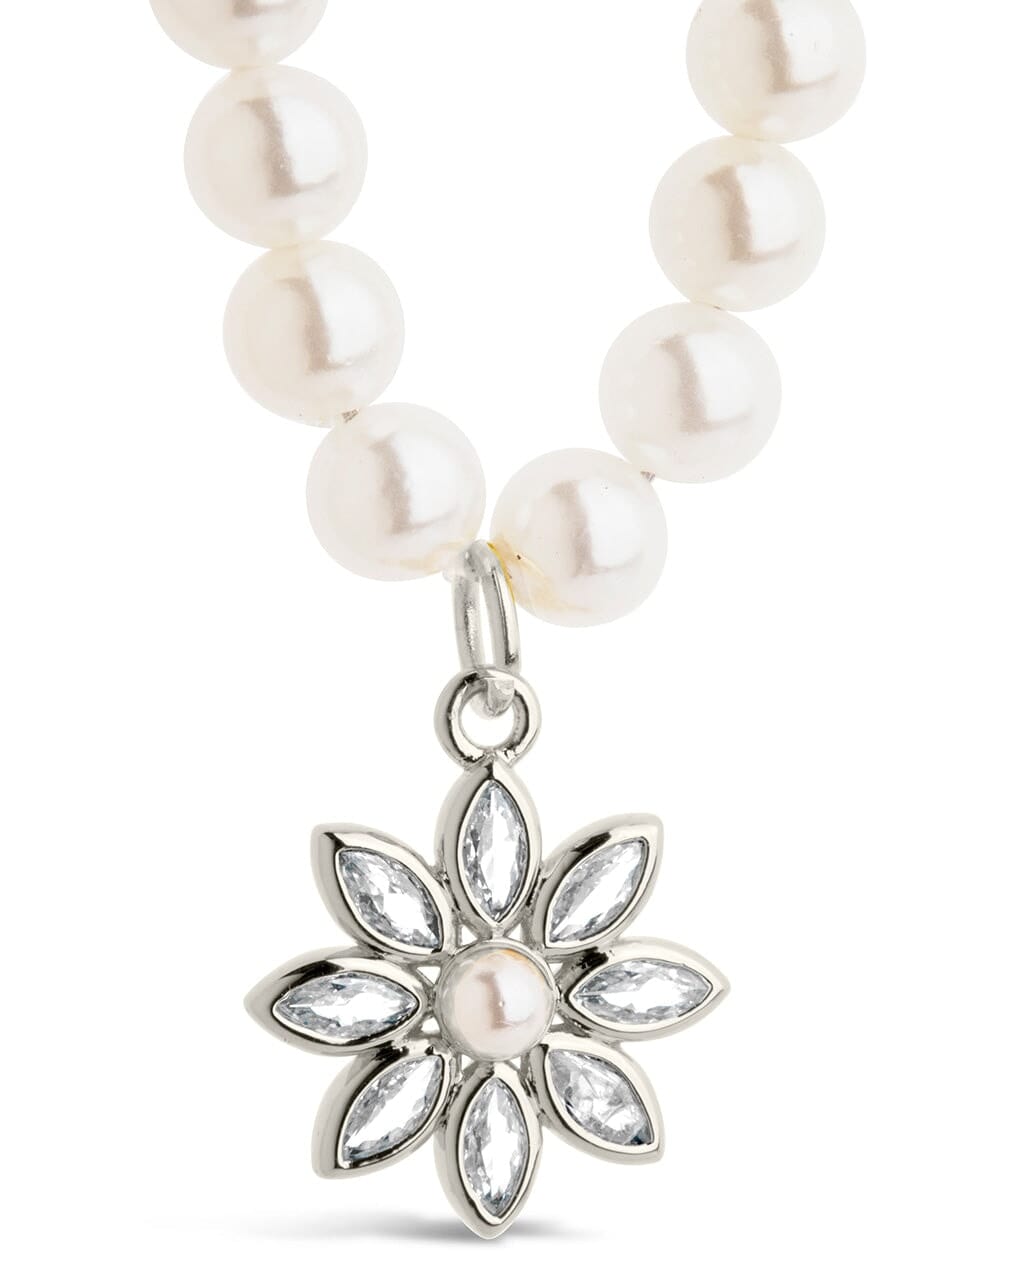 Esti Pearl Necklace Necklace Sterling Forever 